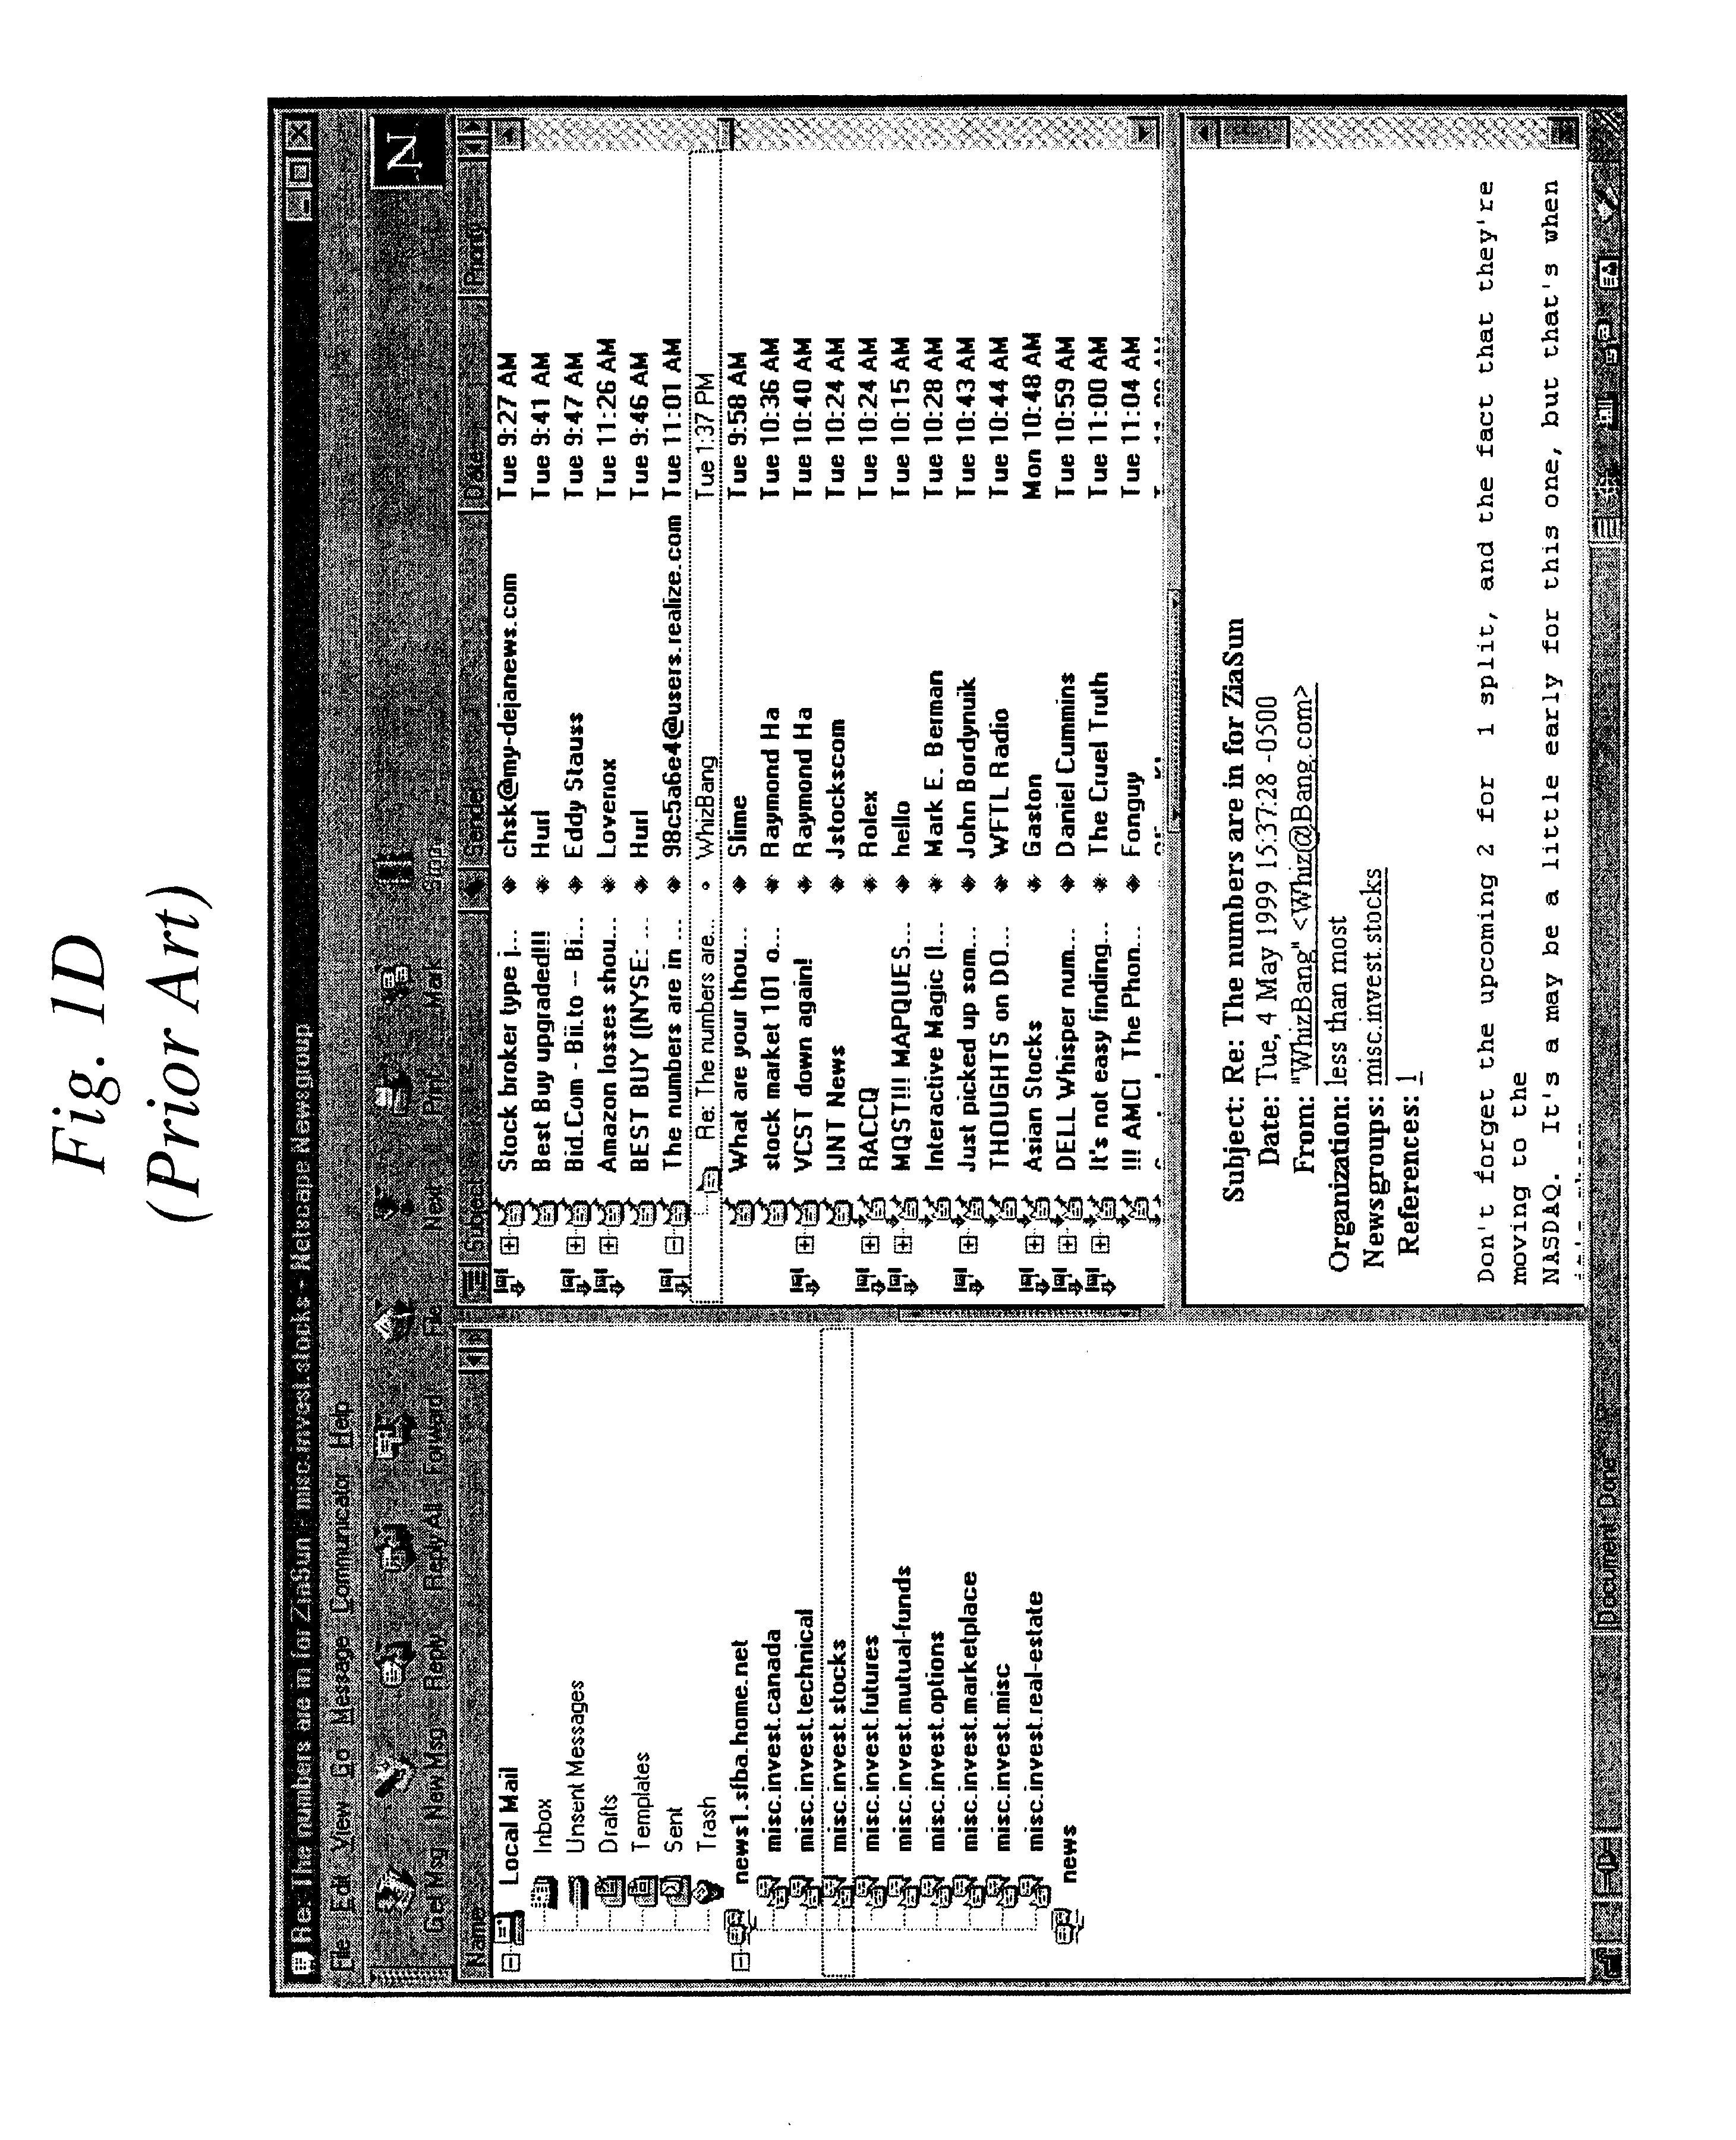 Online content tabulating system and method